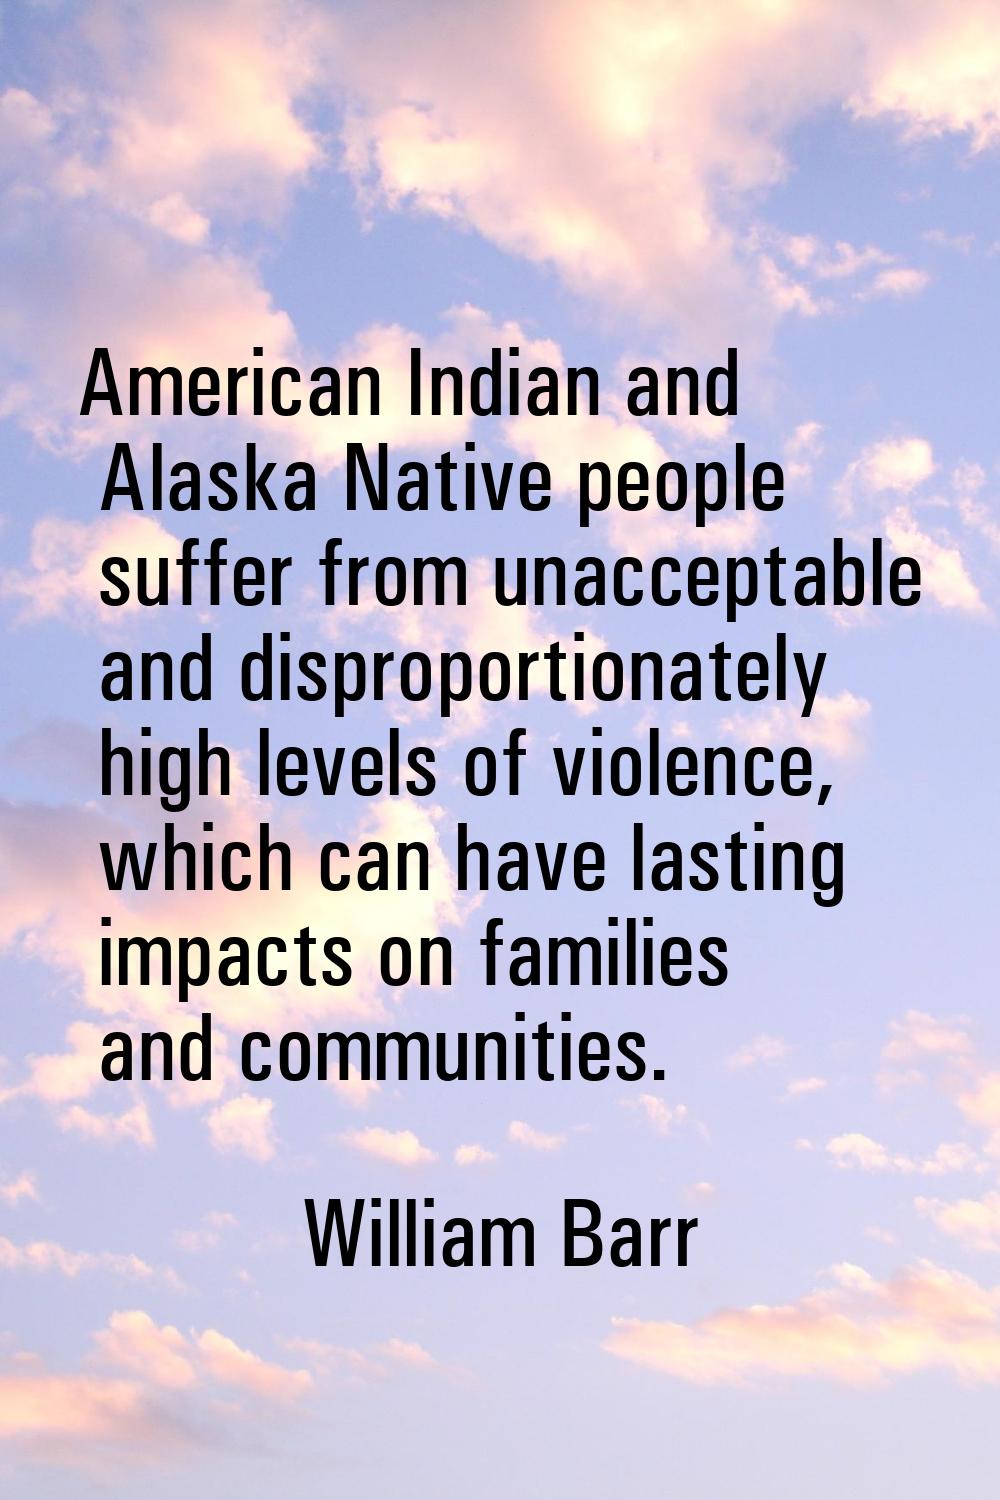 American Indian and Alaska Native people suffer from unacceptable and disproportionately high level